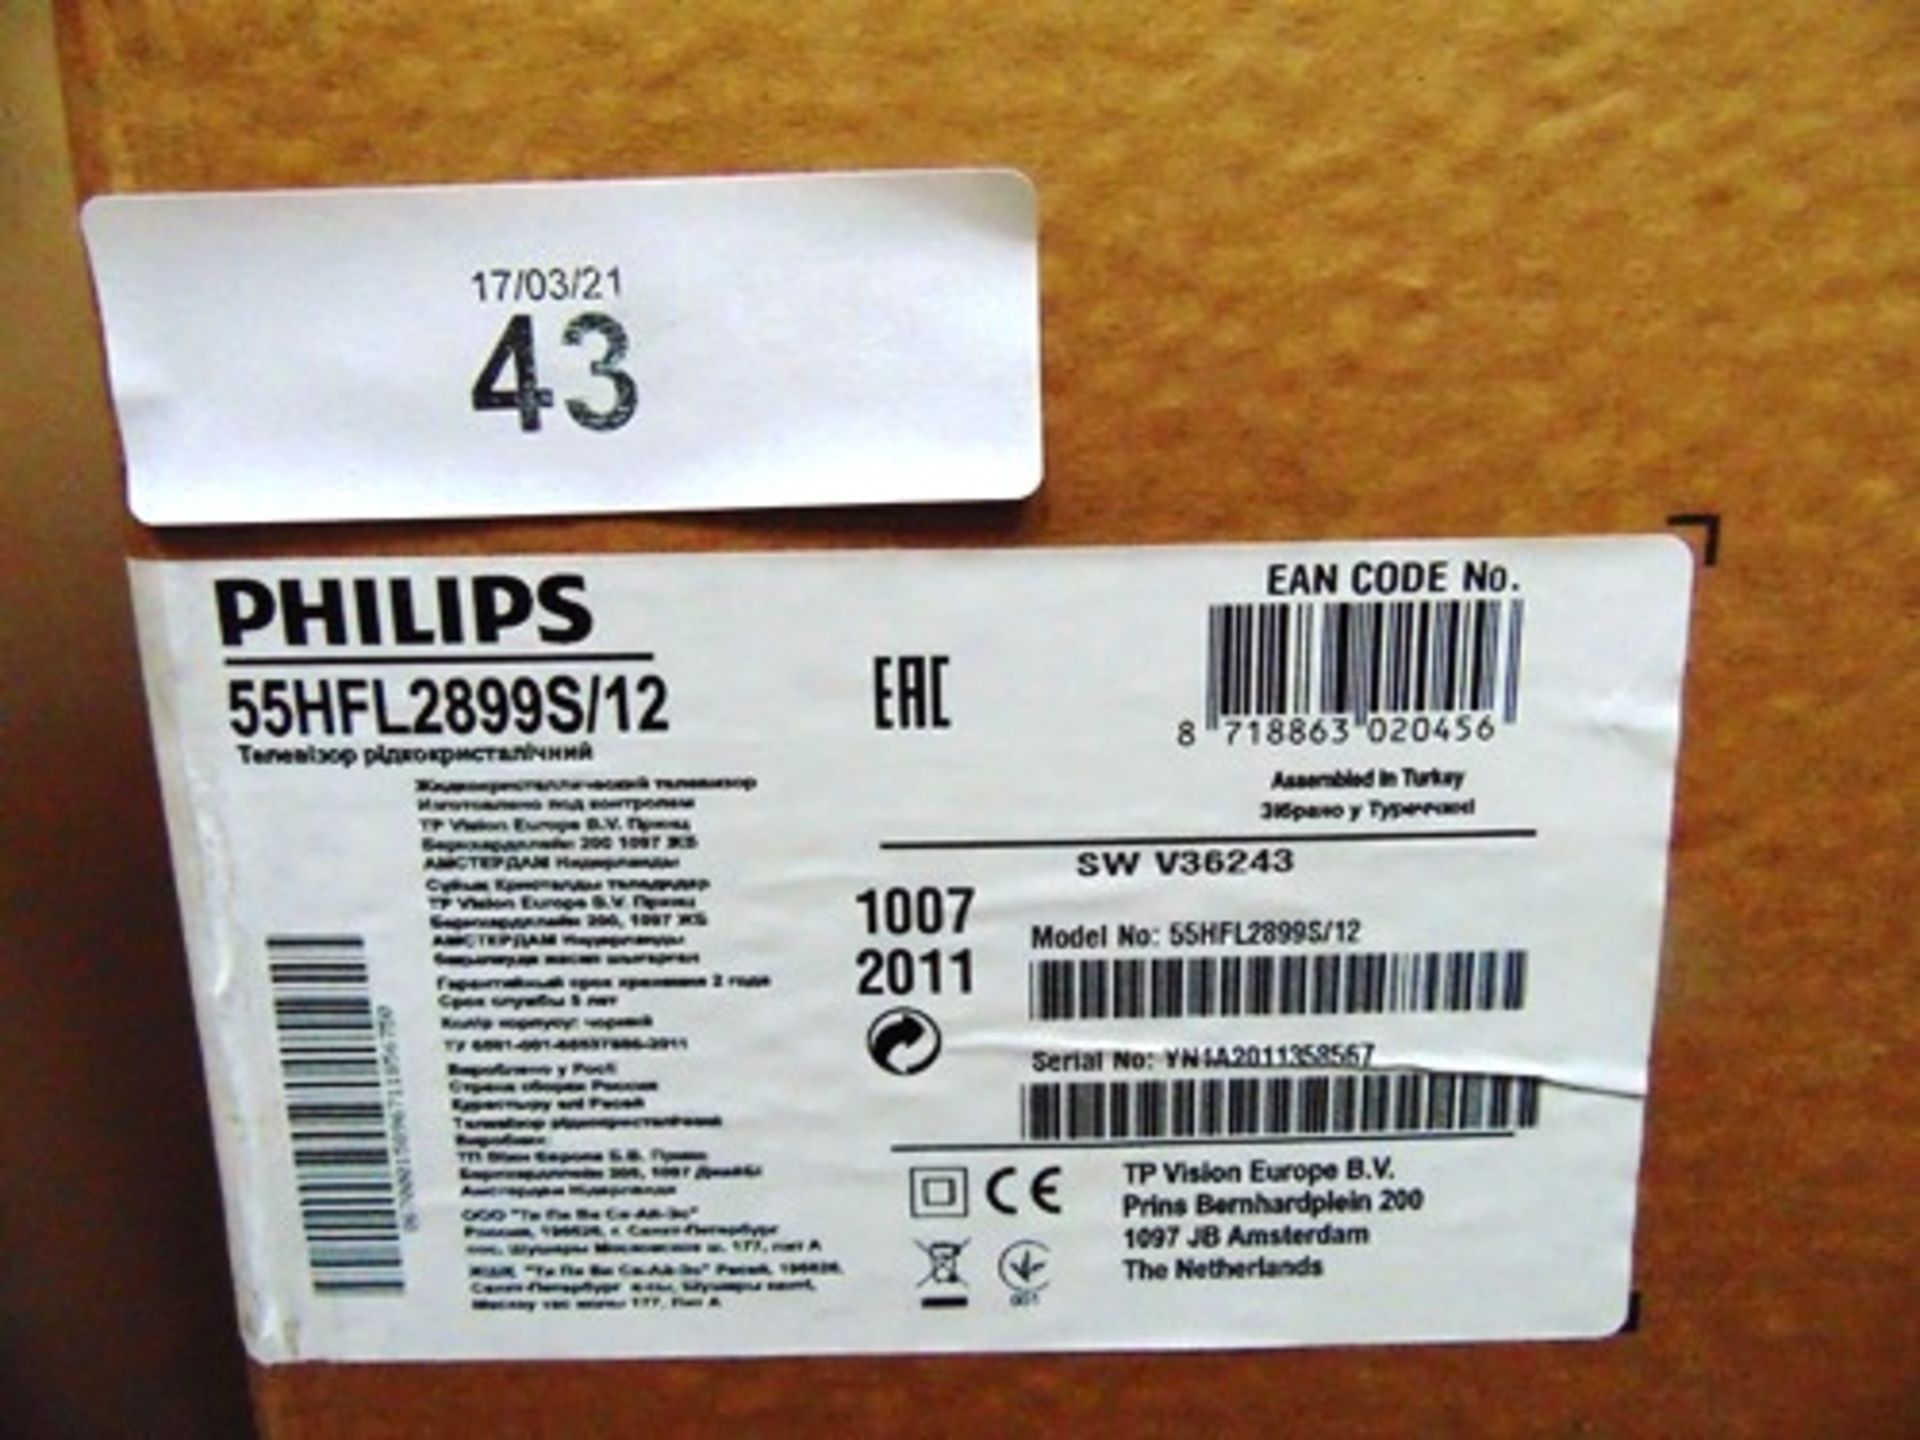 1 x Philips 55" TV, model 55HFL2899S/12 - New in box (ES3end) - Image 2 of 3